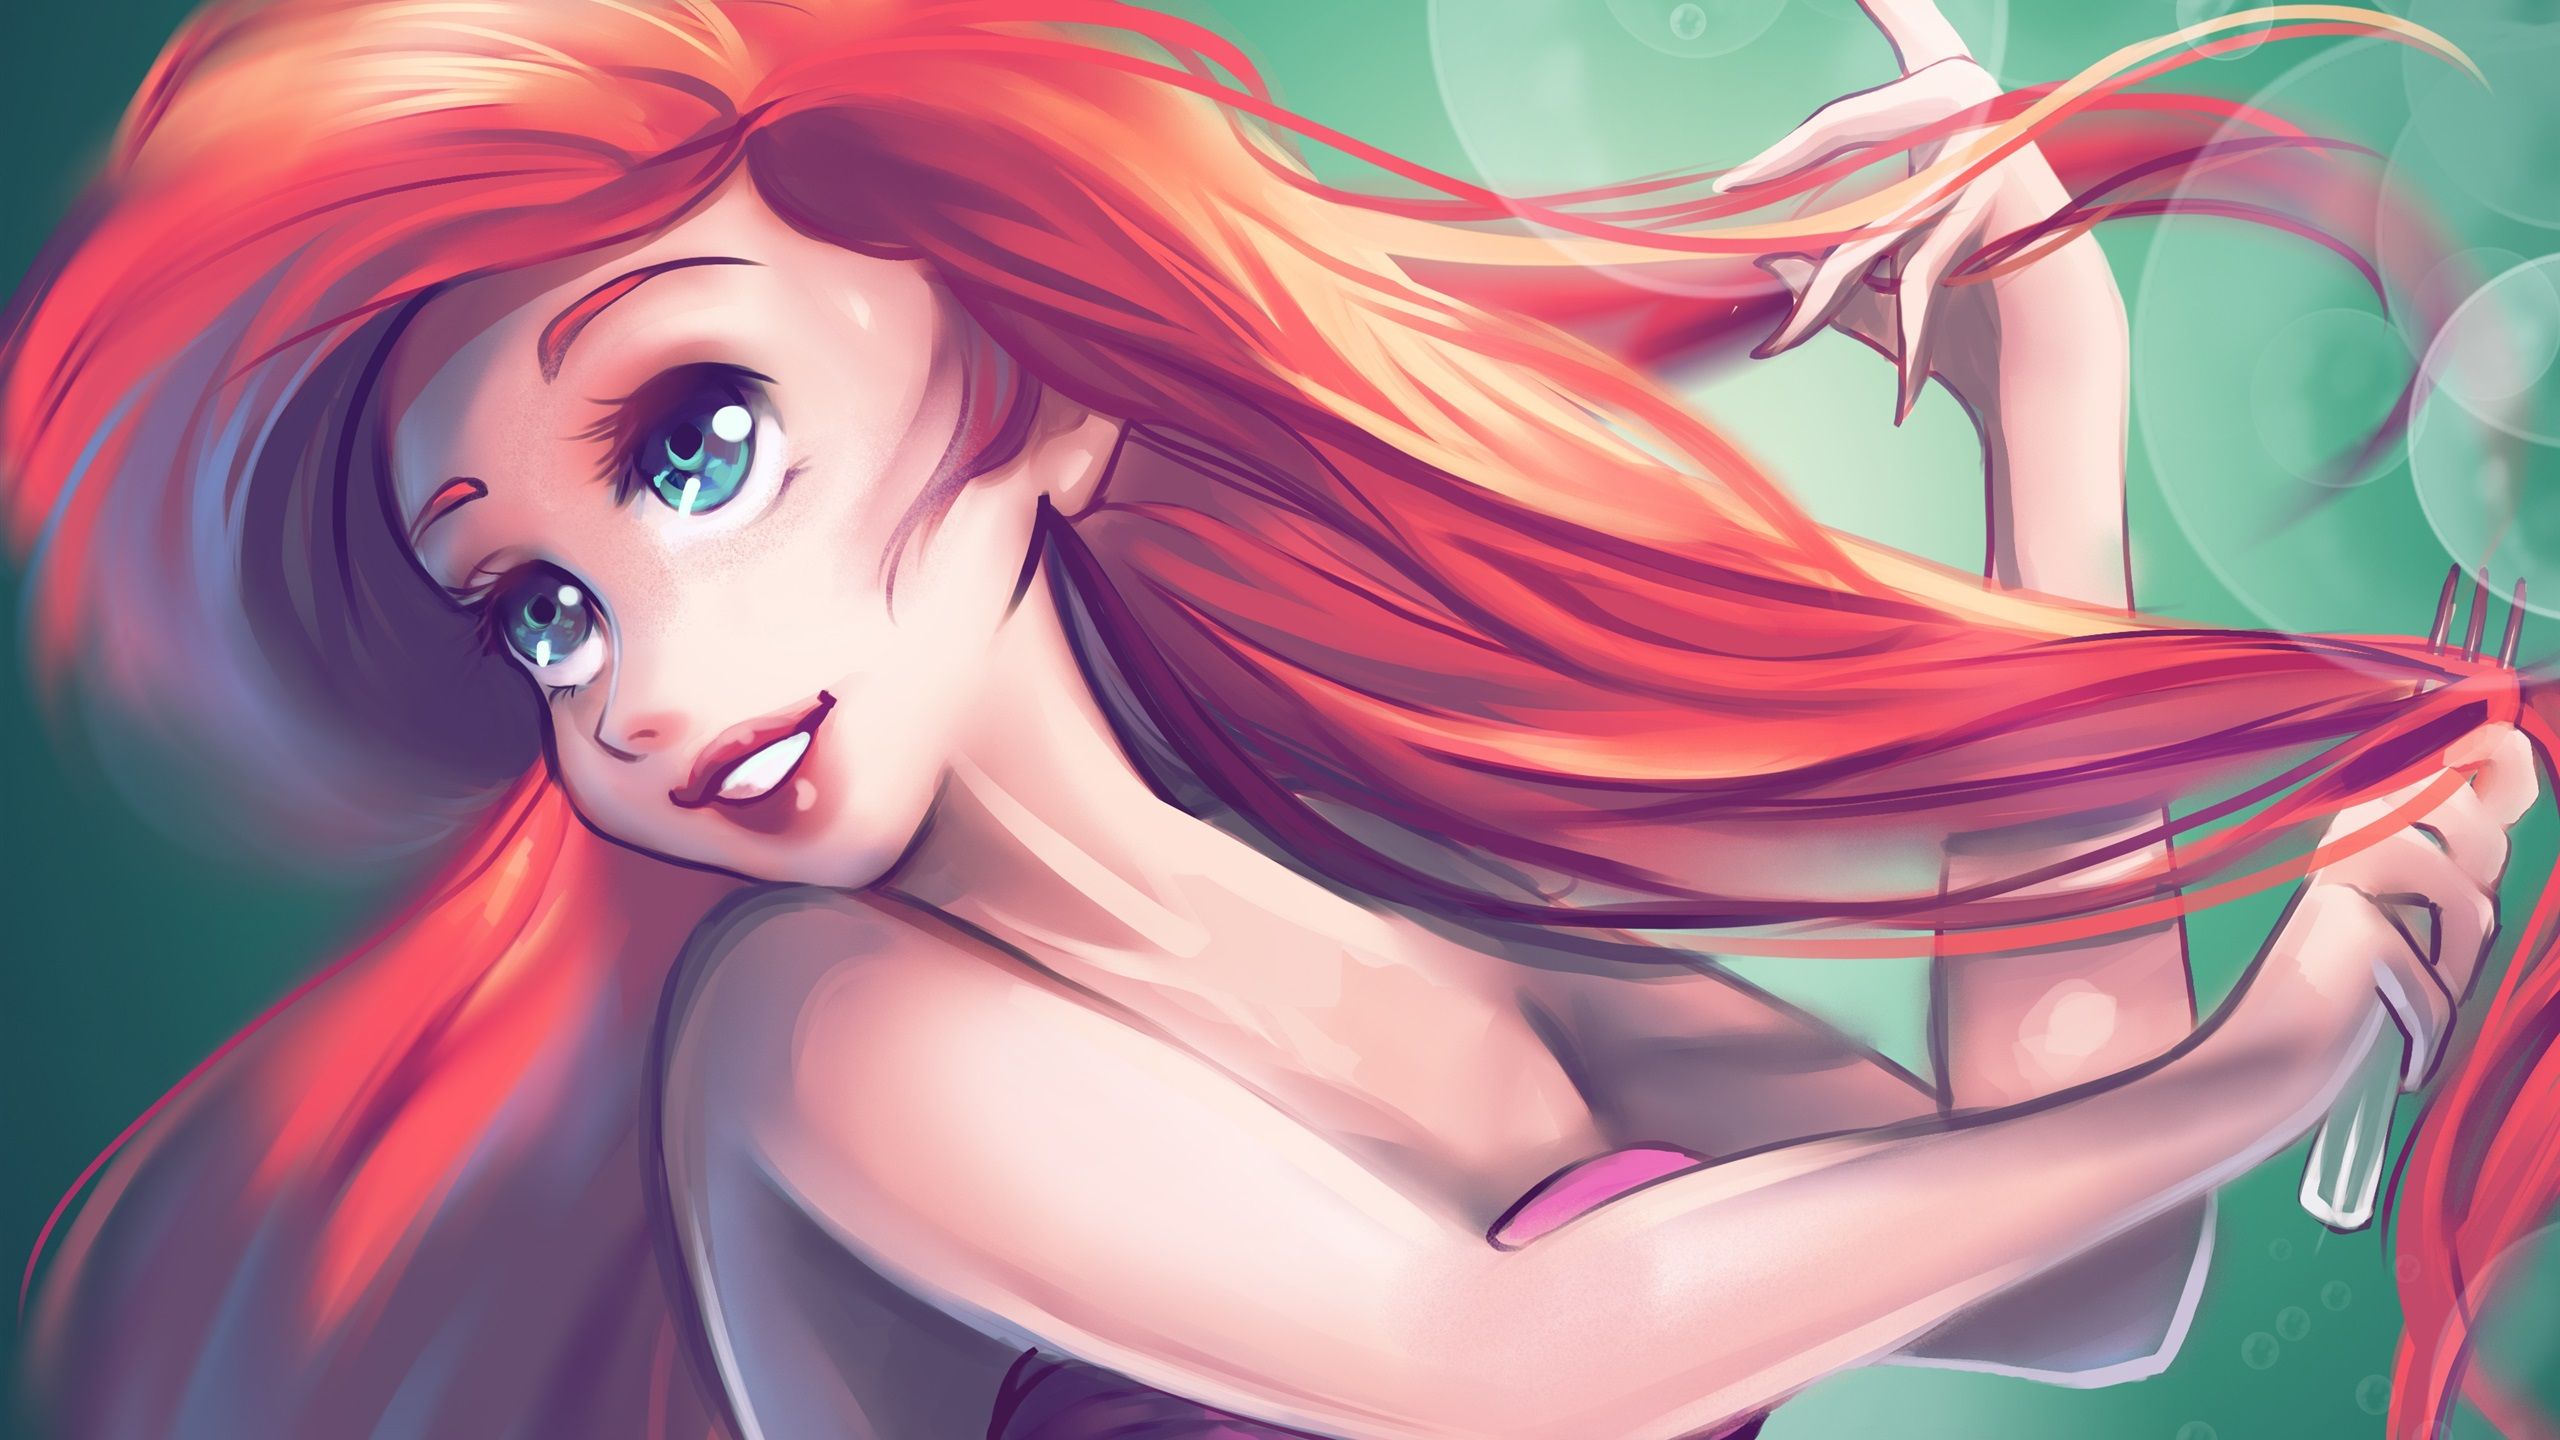 Wallpaper The Little Mermaid, red hair, blue eyes 2880x1800 HD Picture, Image